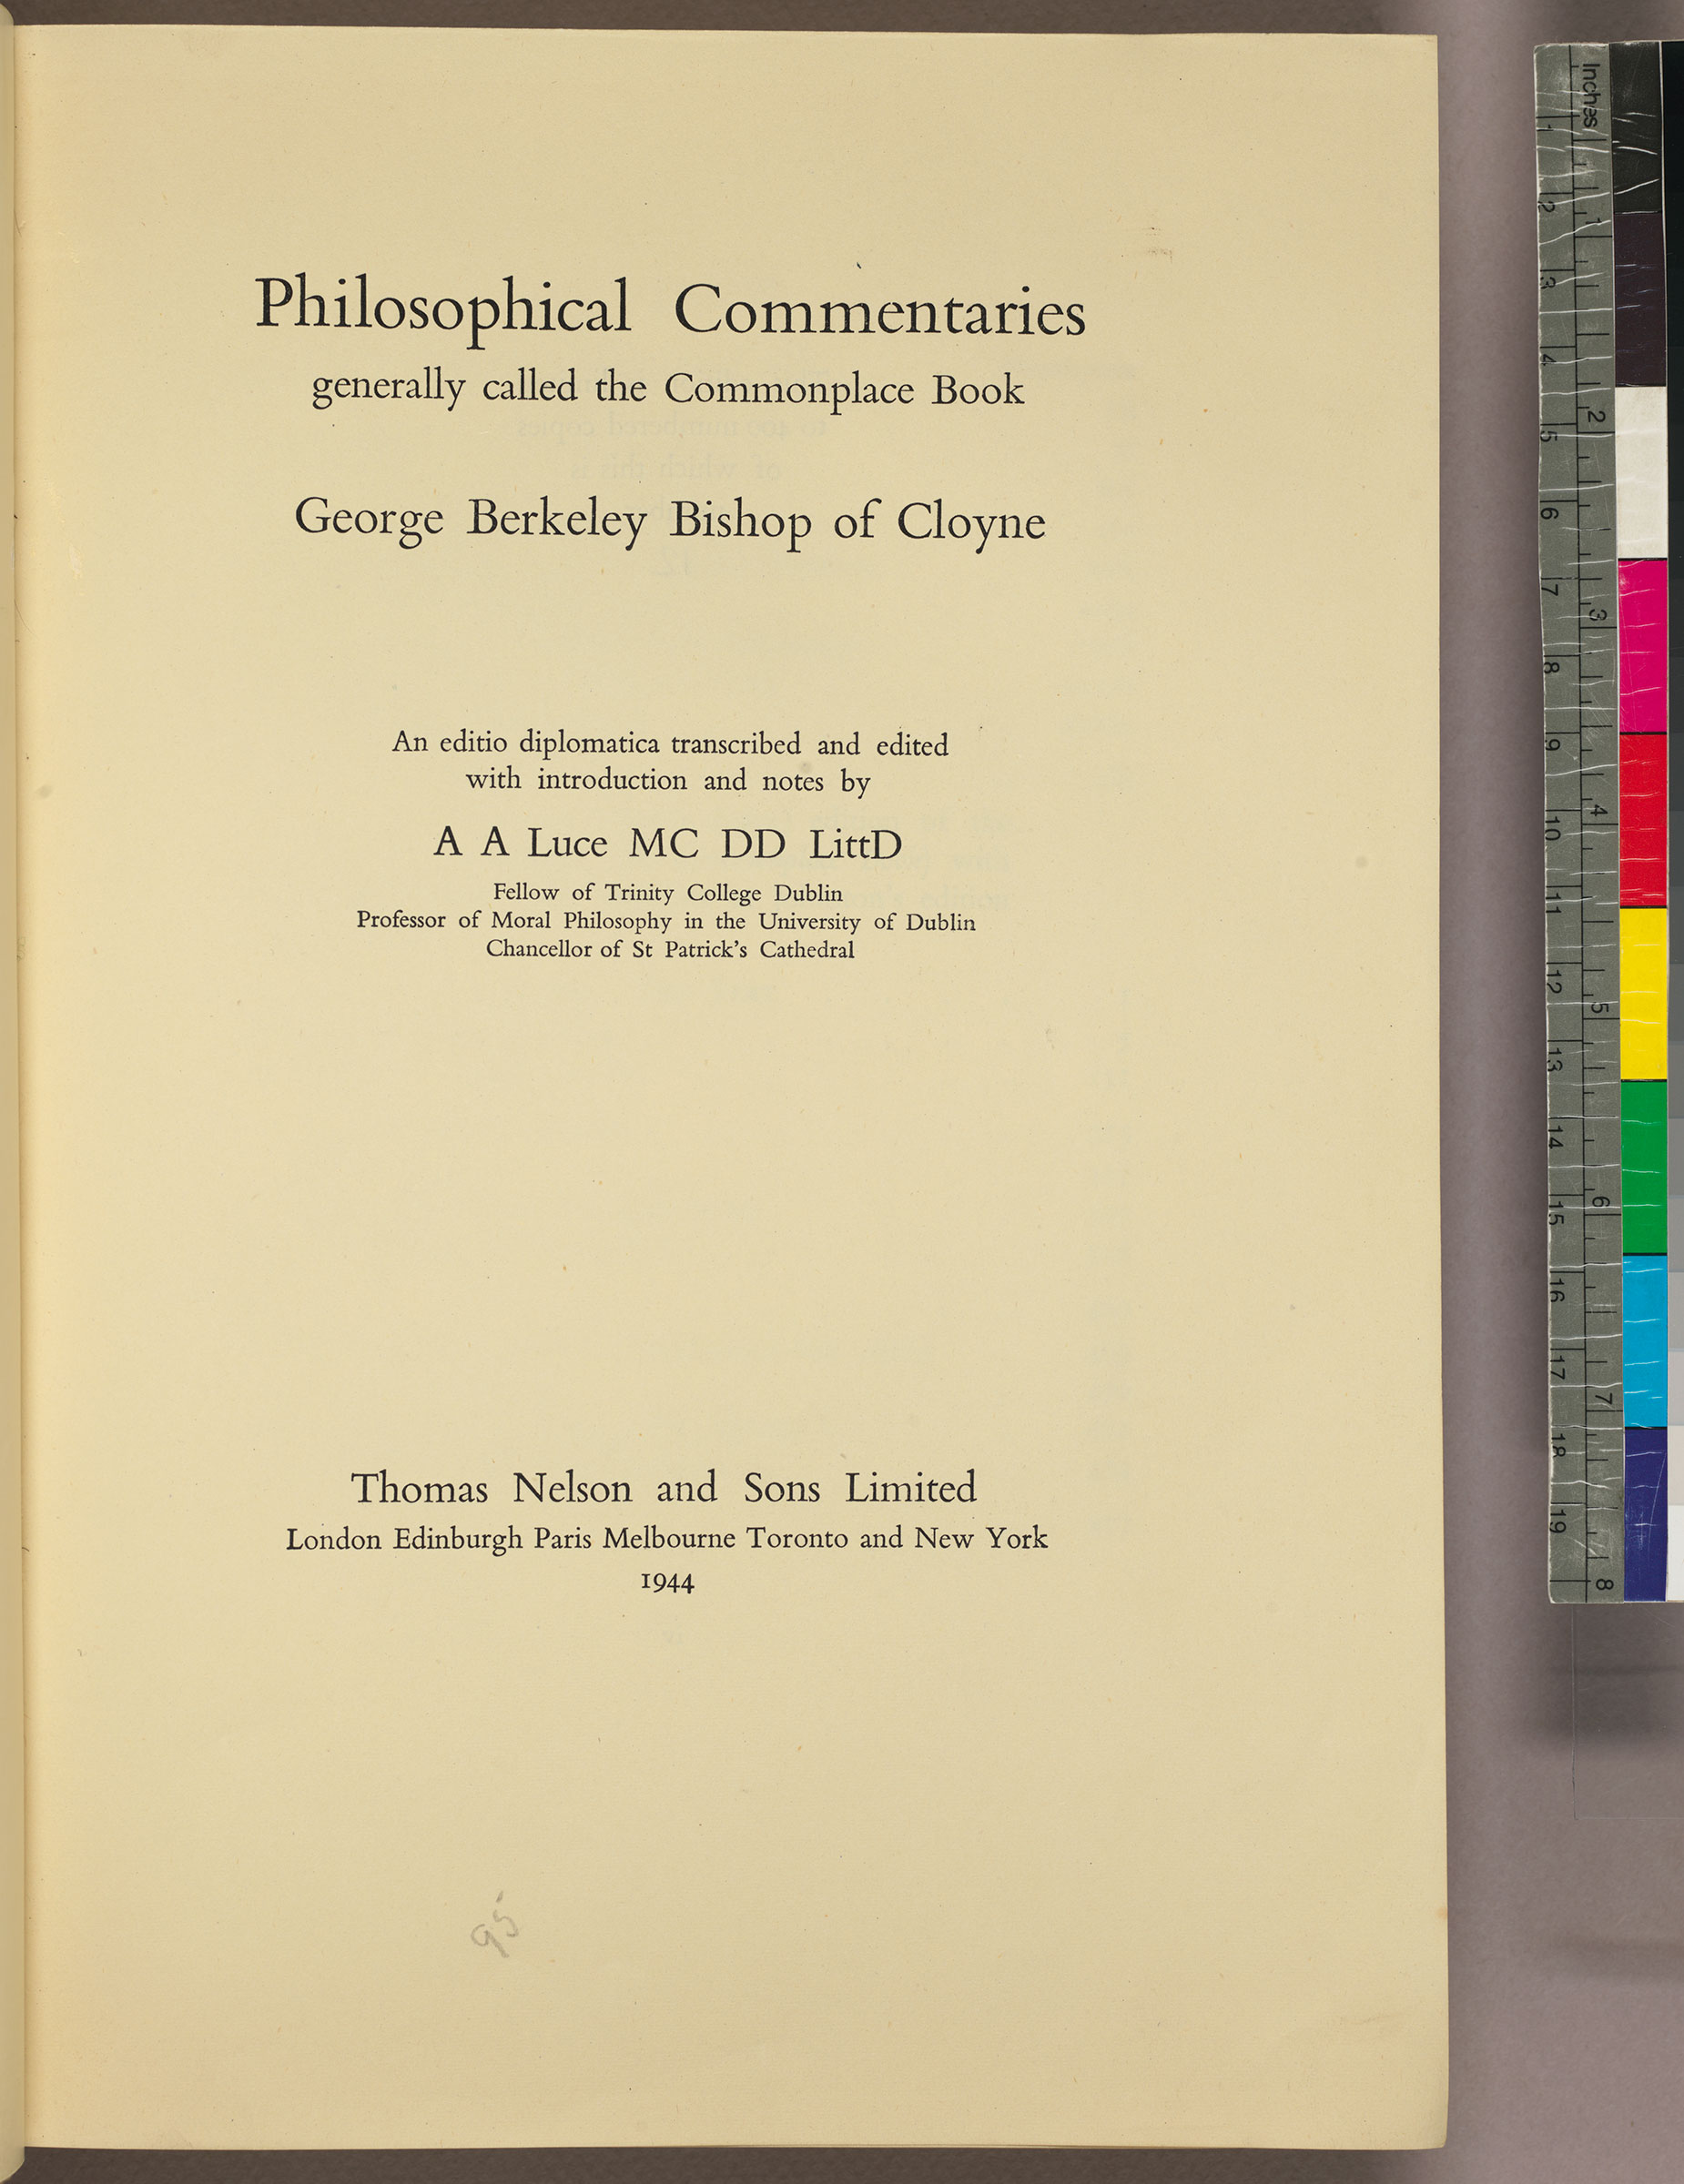 A Scholar’s Books: The Luce Collection of Berkeley – RBSC at ND